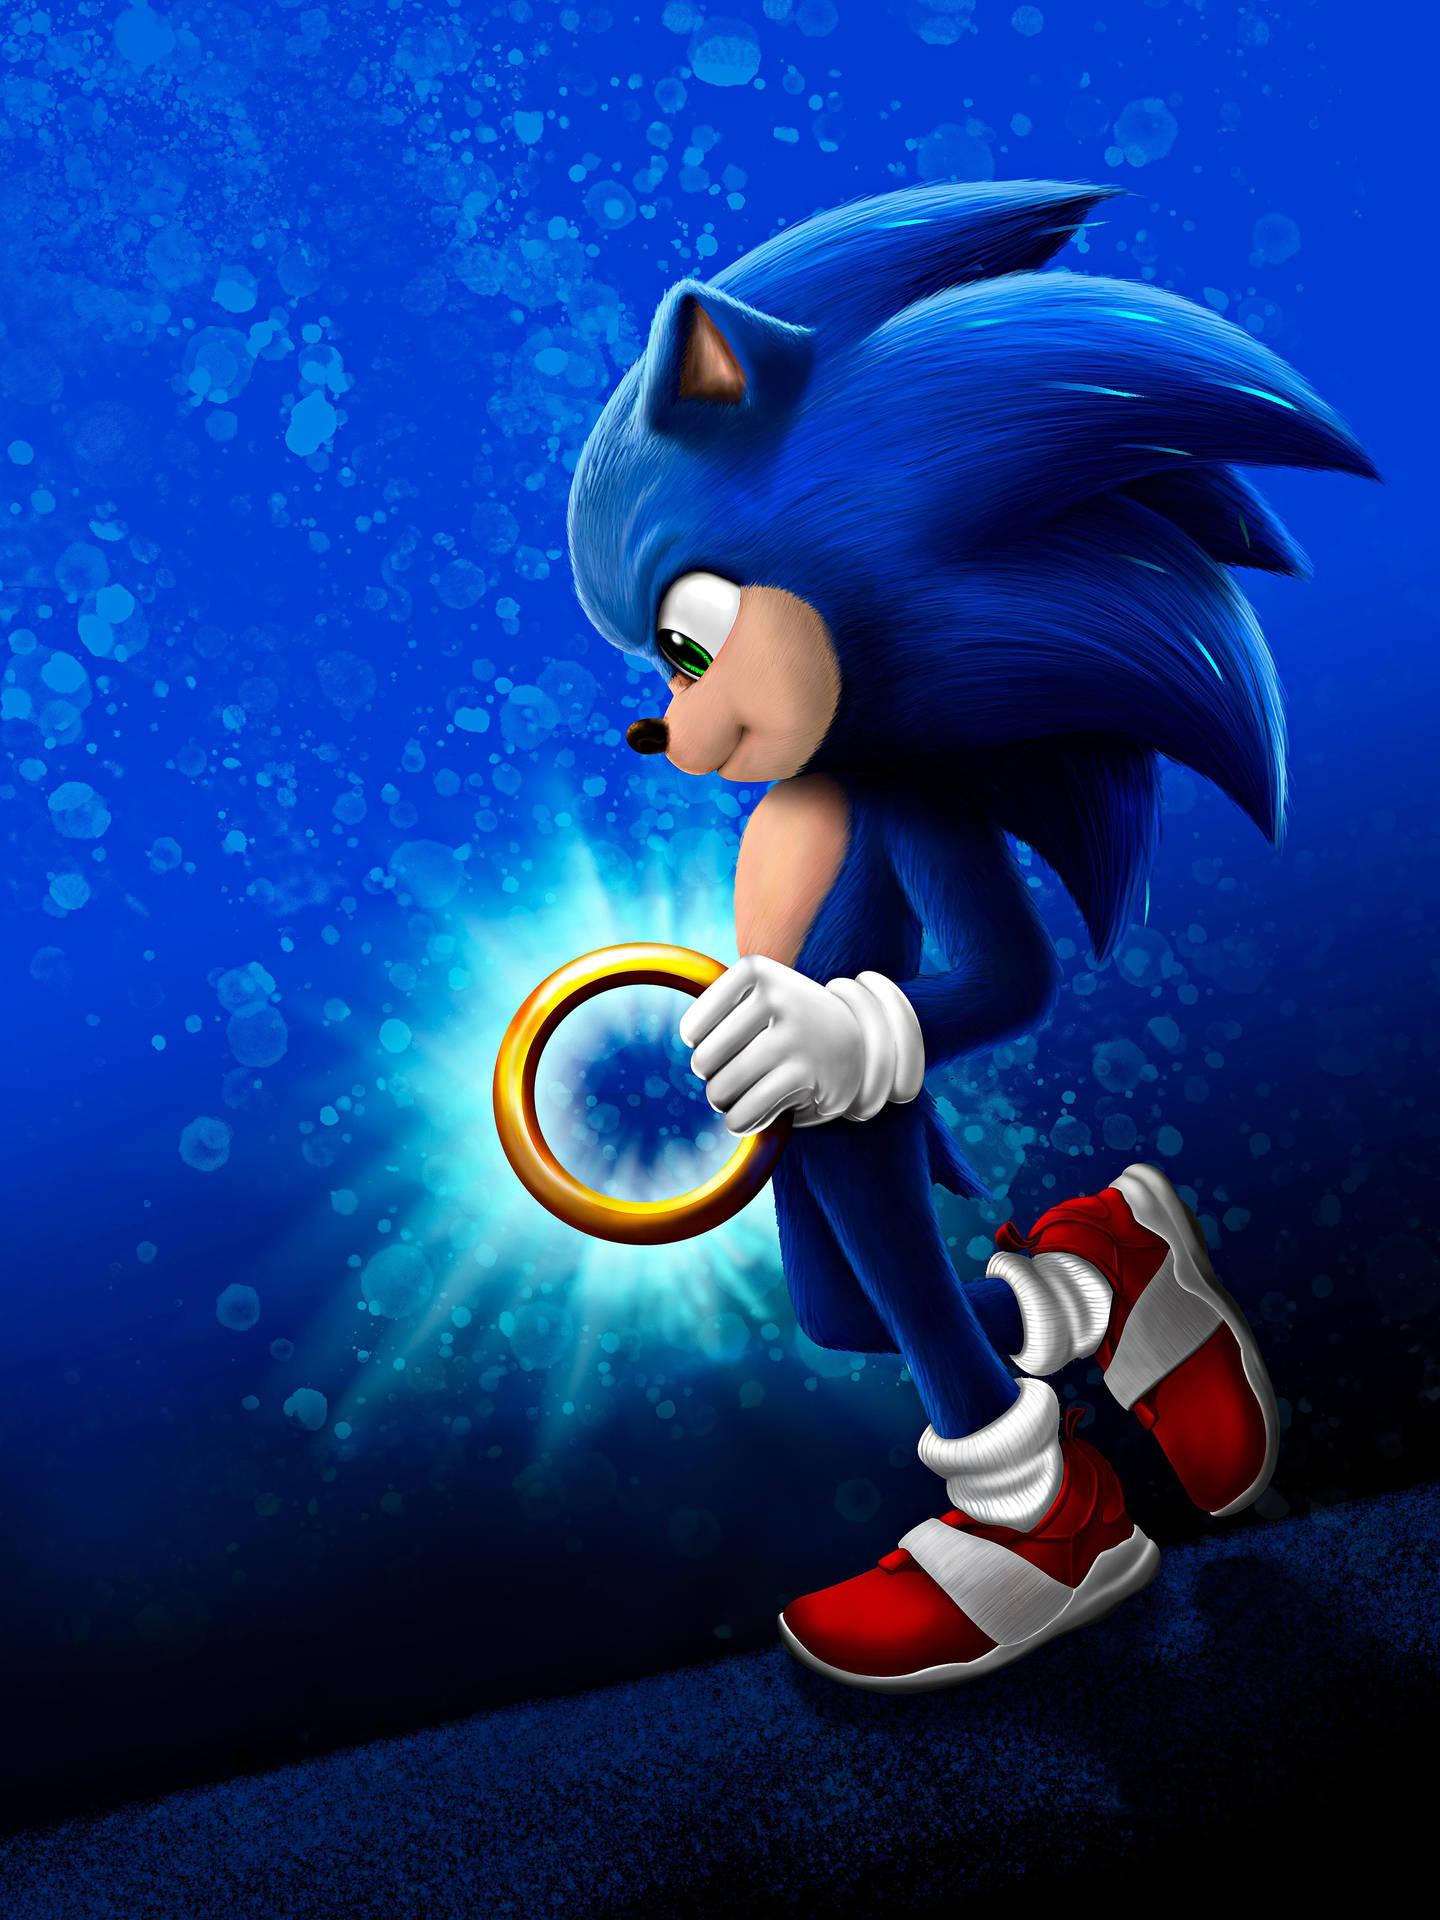 Sonic The Hedgehog With A Glowing Ring Wallpaper